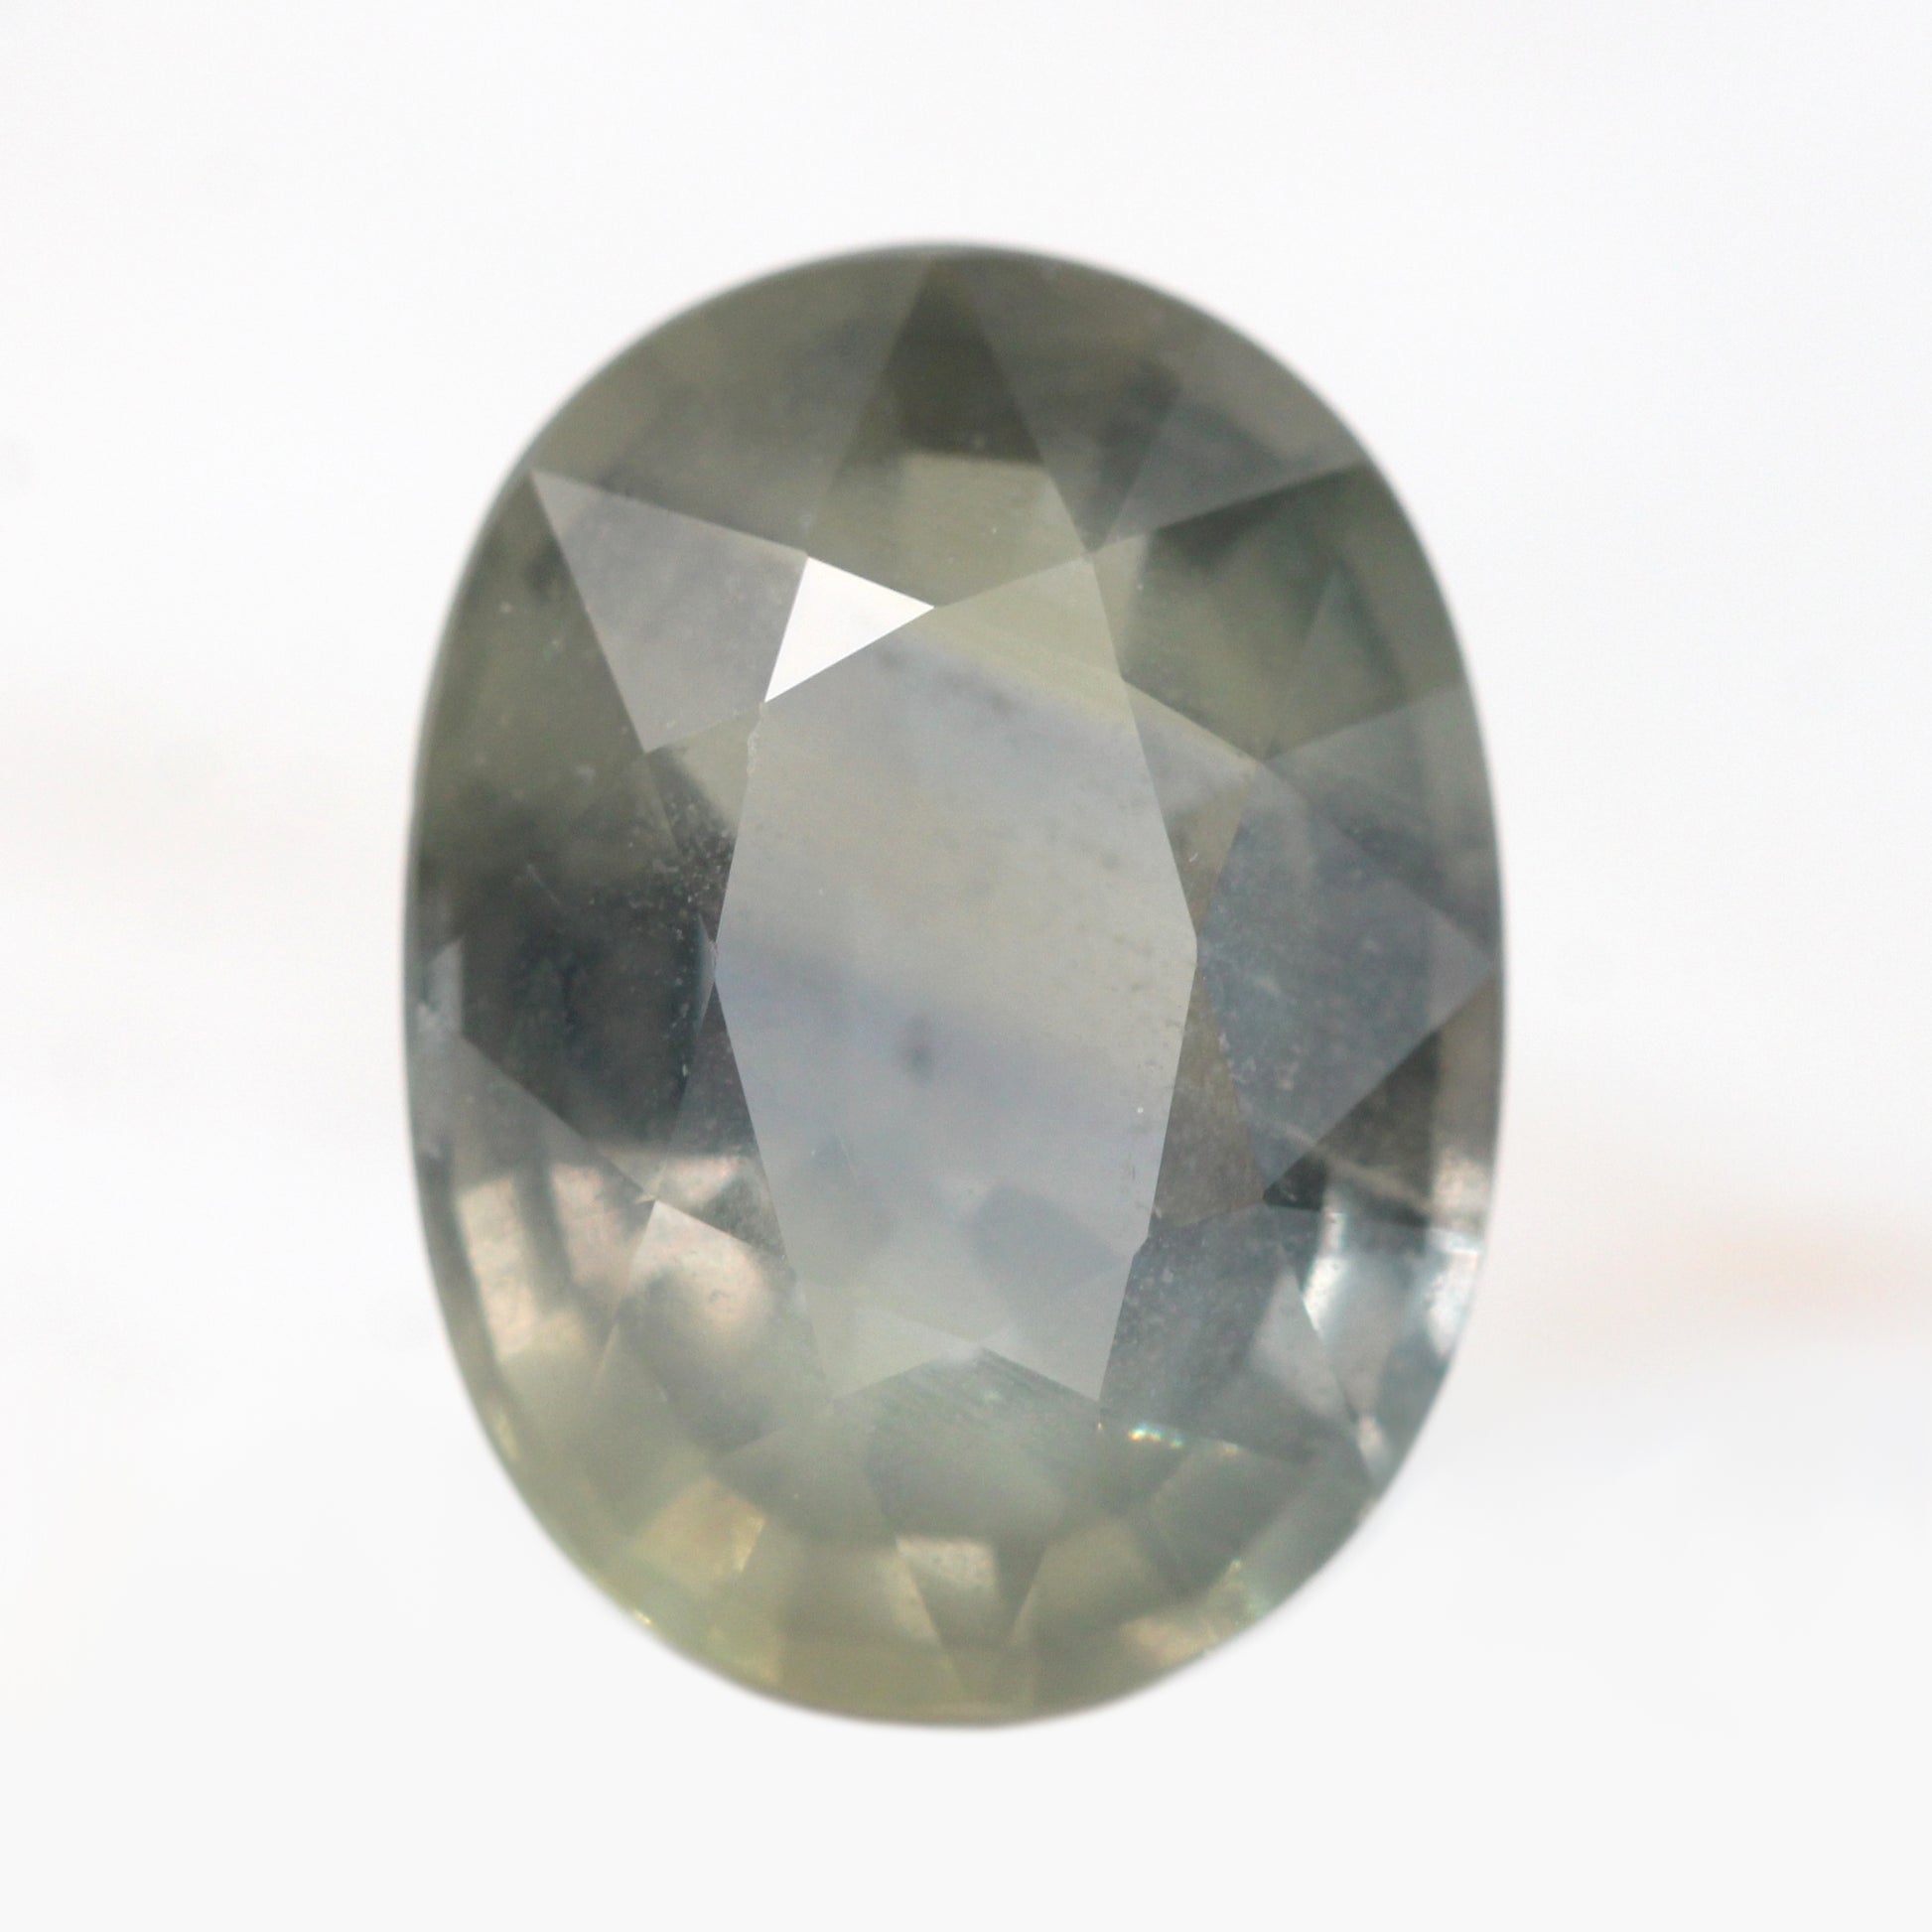 5.88 Carat Earthy Gray Color Change Oval Sapphire for Custom Work - Inventory Code GOS588 - Midwinter Co. Alternative Bridal Rings and Modern Fine Jewelry